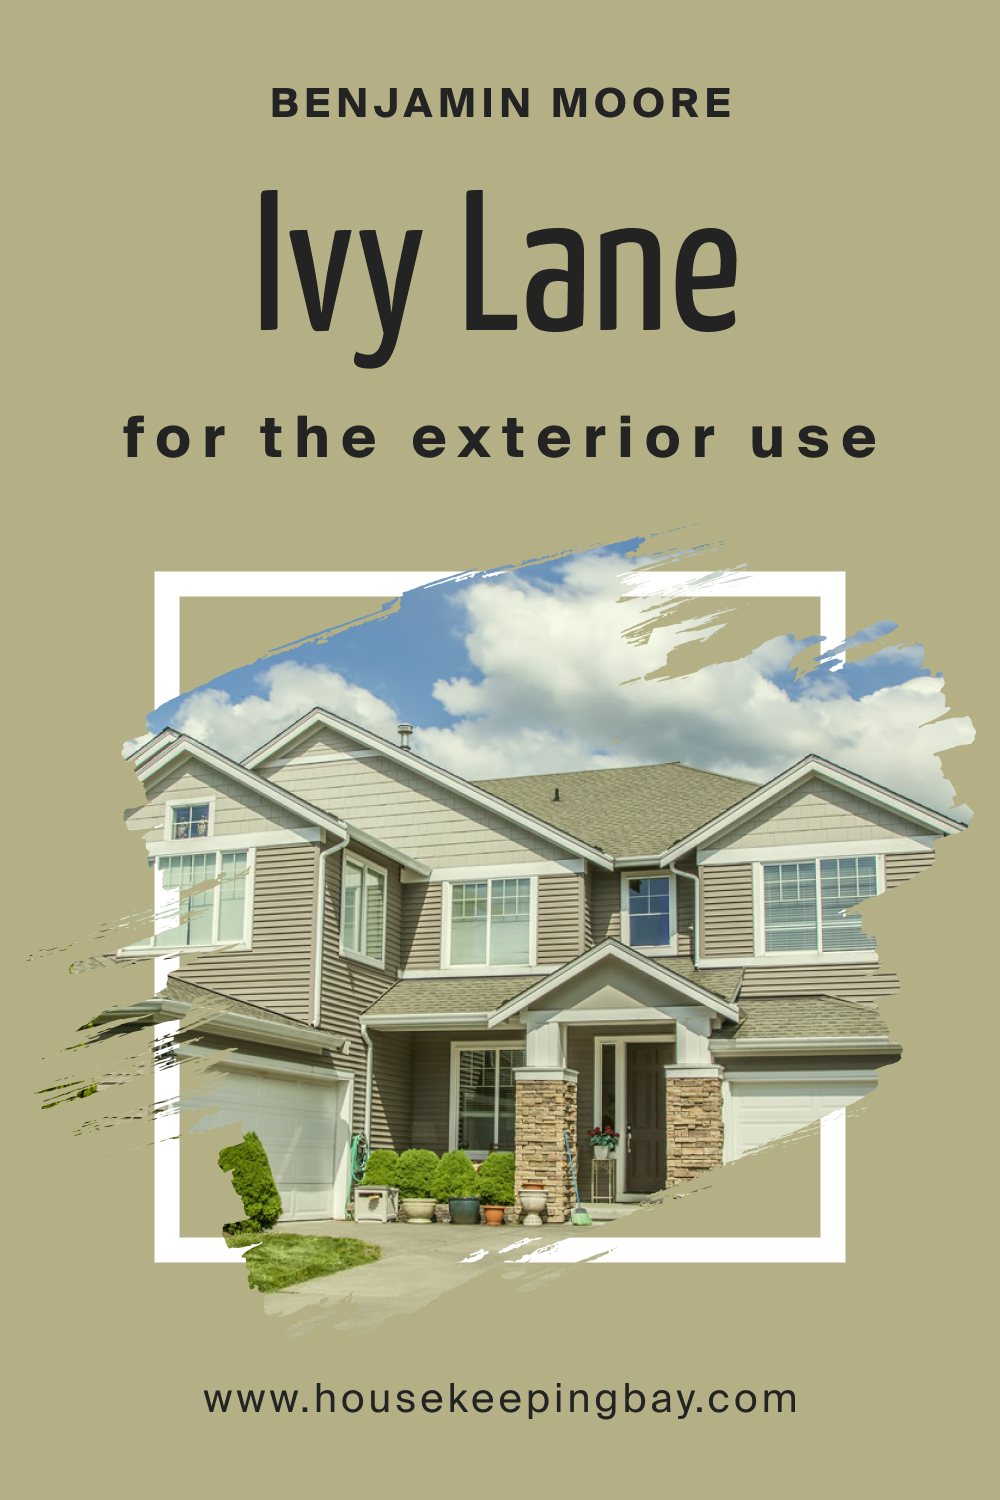 How to Use BM Ivy Lane 523 for an Exterior?